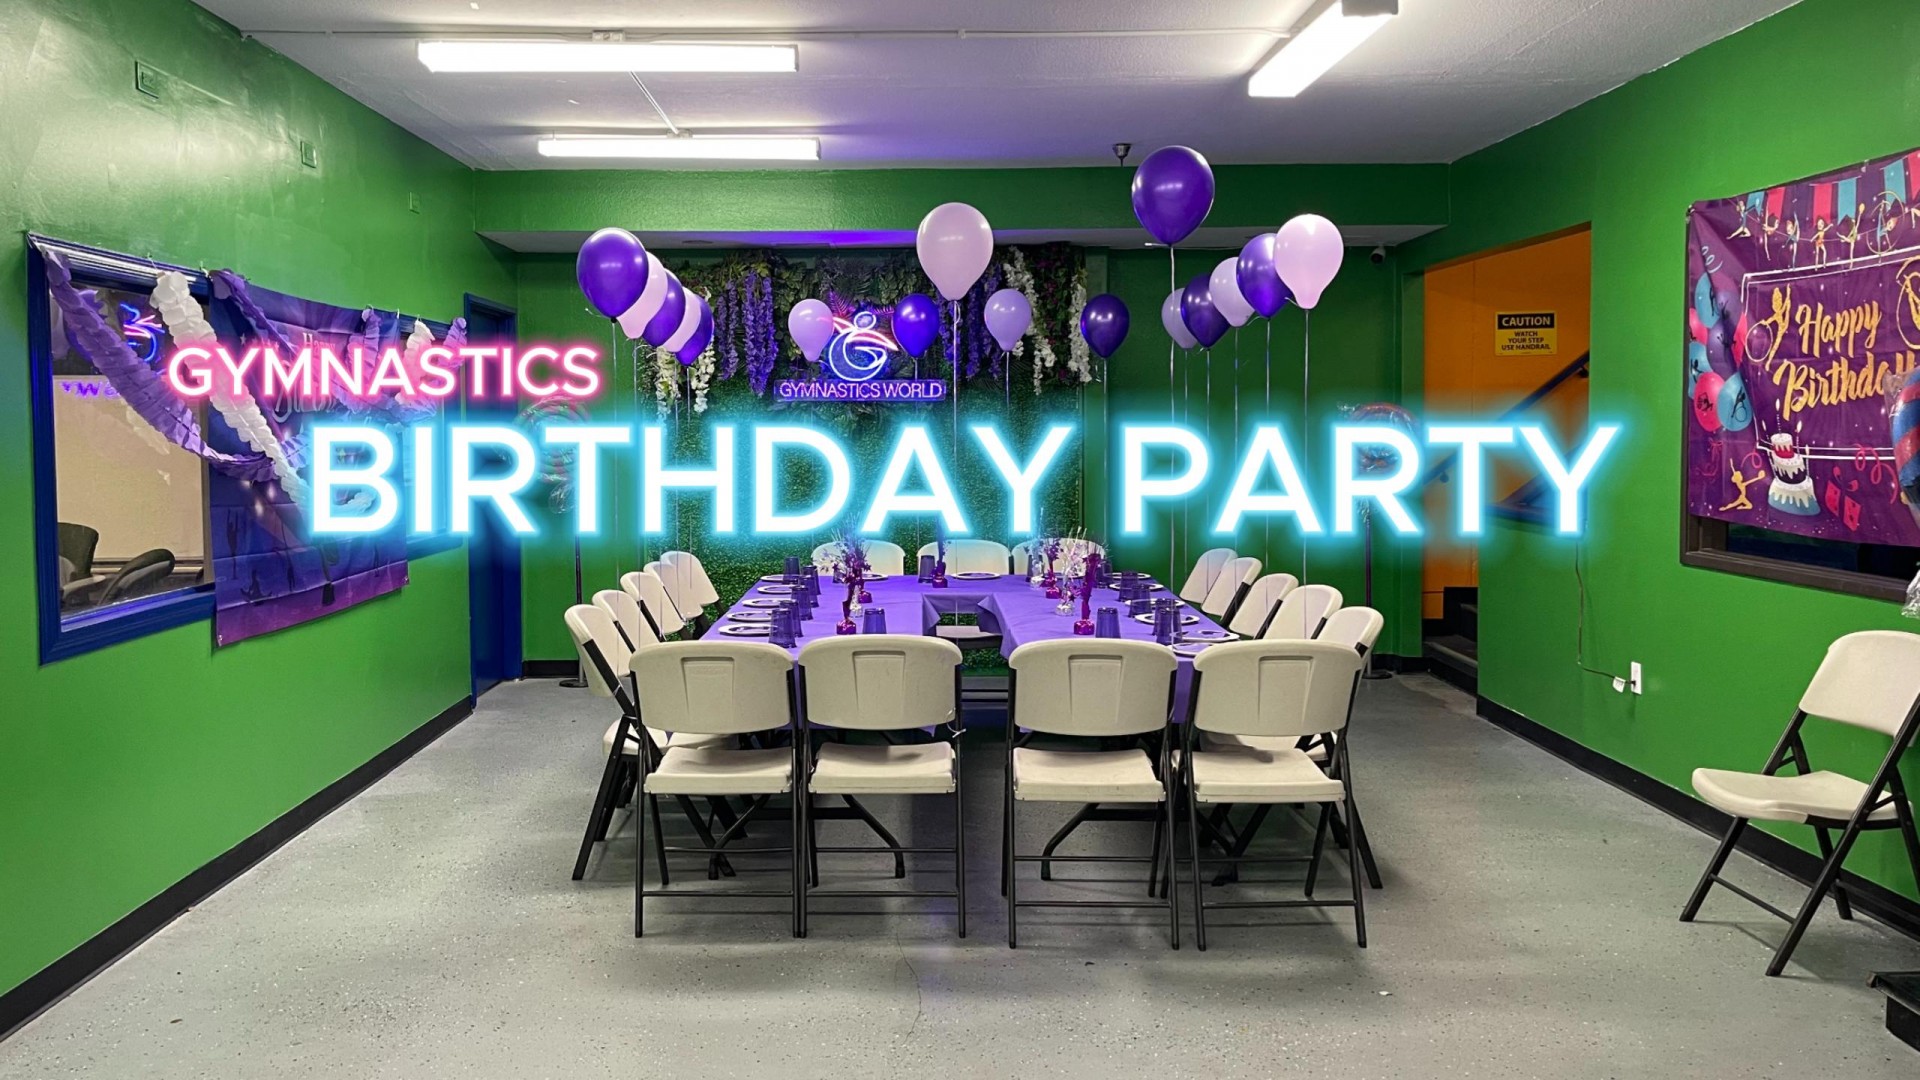 Gymnastics Birthday Party, Green room with tables and chairs setup for kids, purple decoration and balloons.  Text reads Gymnastics Birthday Party.